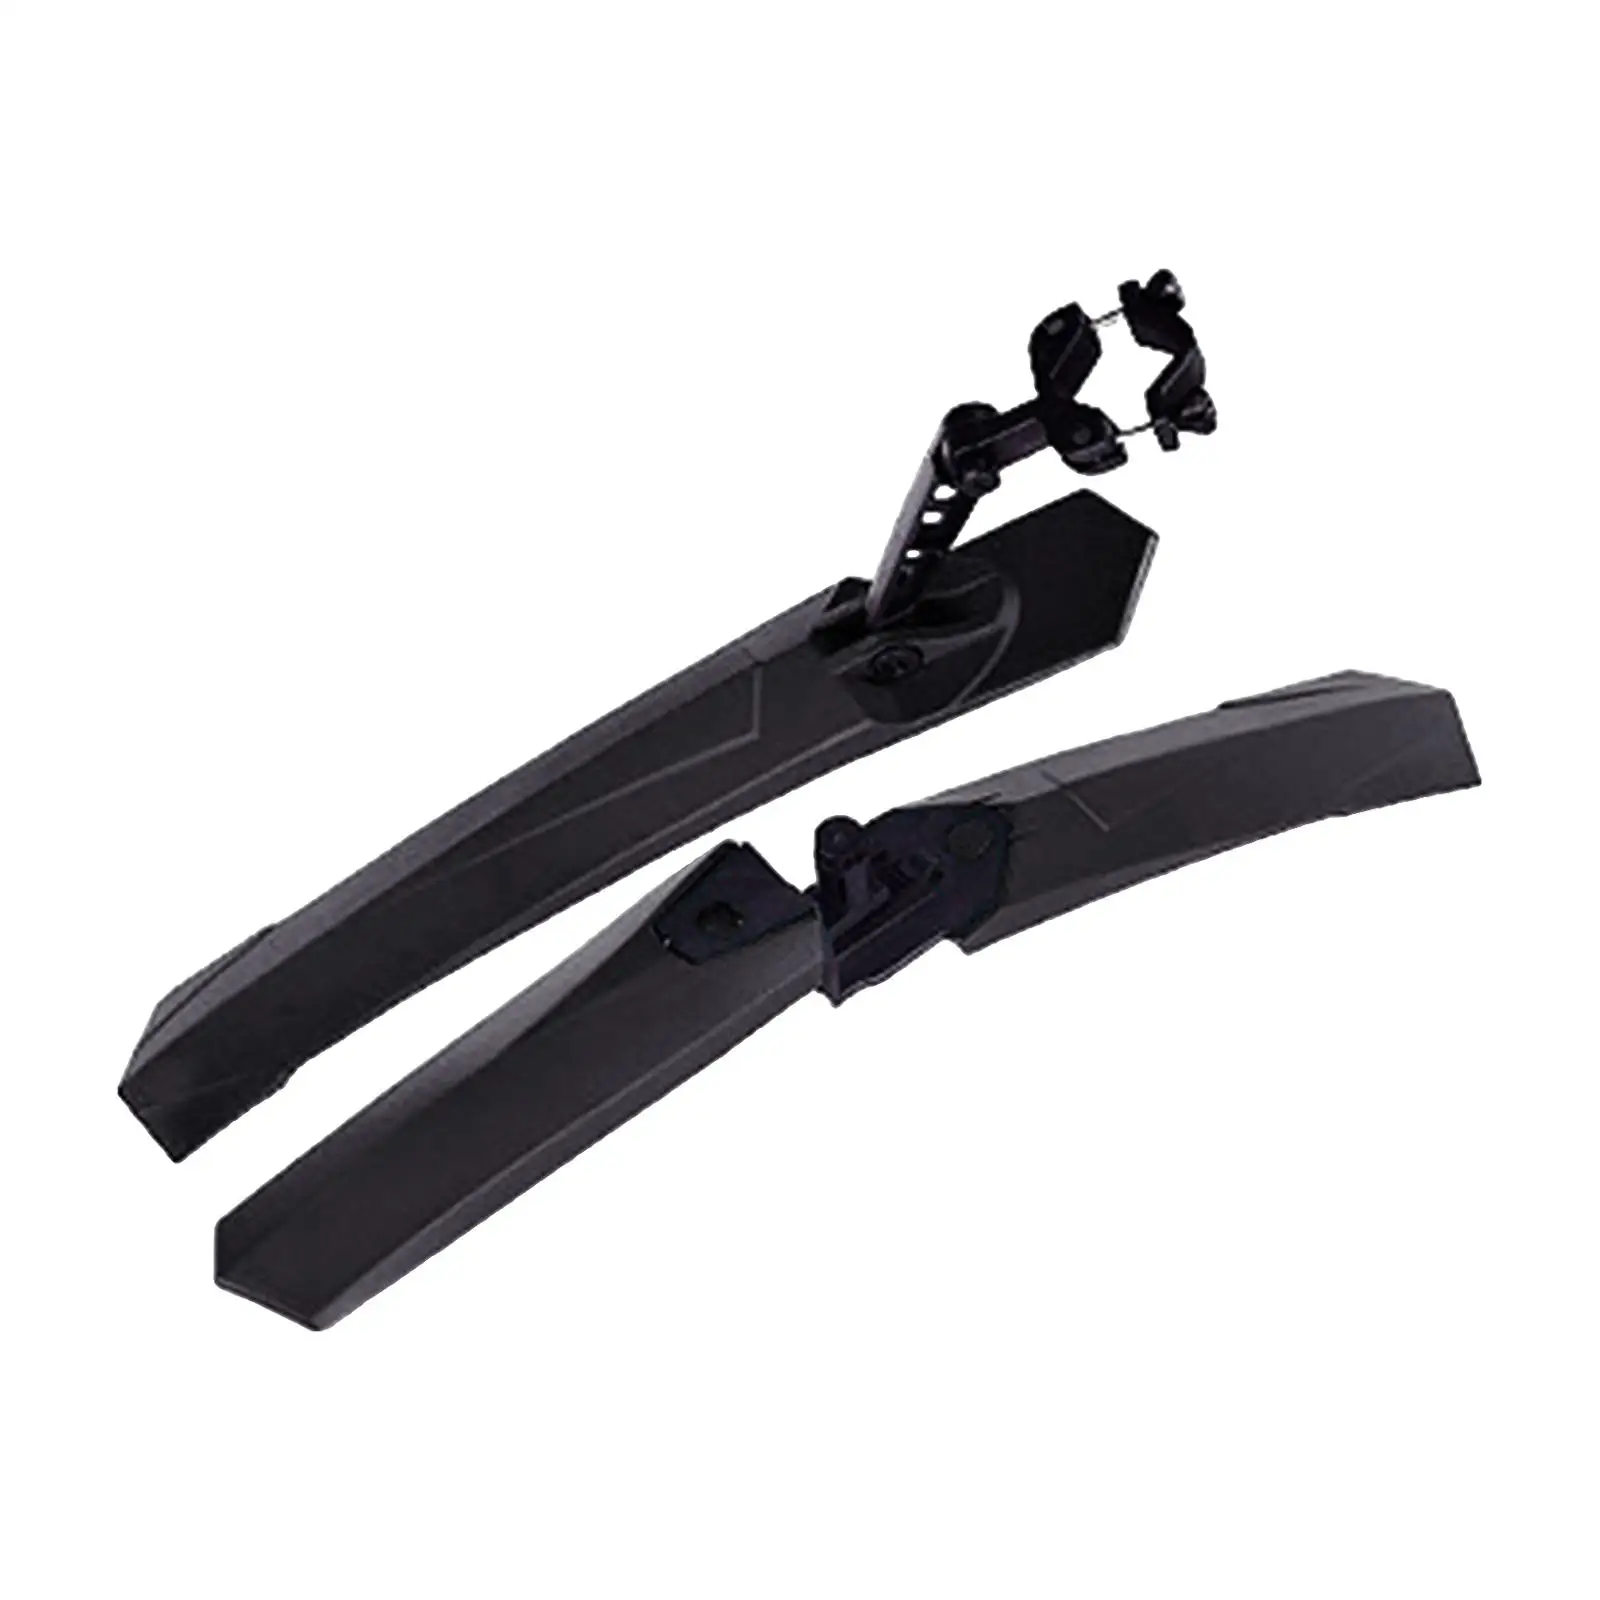 Bike Mudguard Bike Front and Rear Set Full Cover against Splashing Mountain Bike Mud Guard for Traveling Direct Replaces